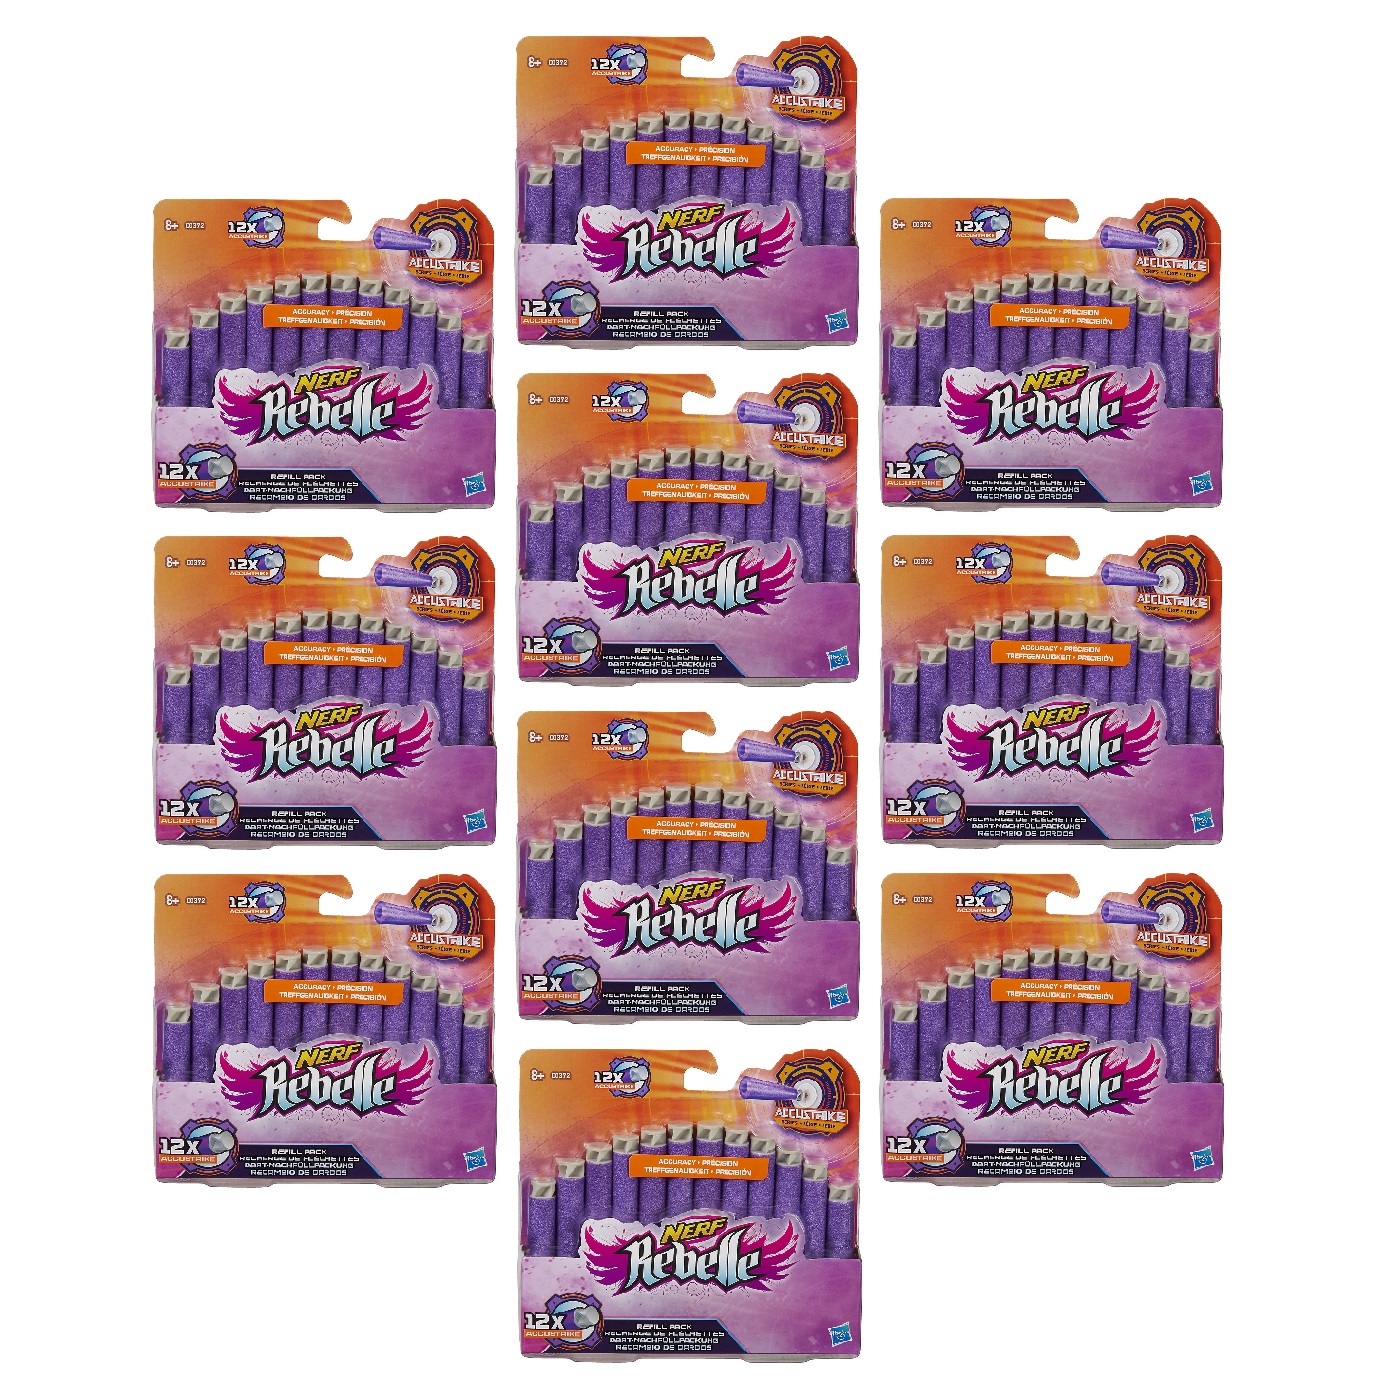 Details about   Hasbro Nerf Rebelle Message Dart Refill 8 Darts Model A8861 New Opened Package 